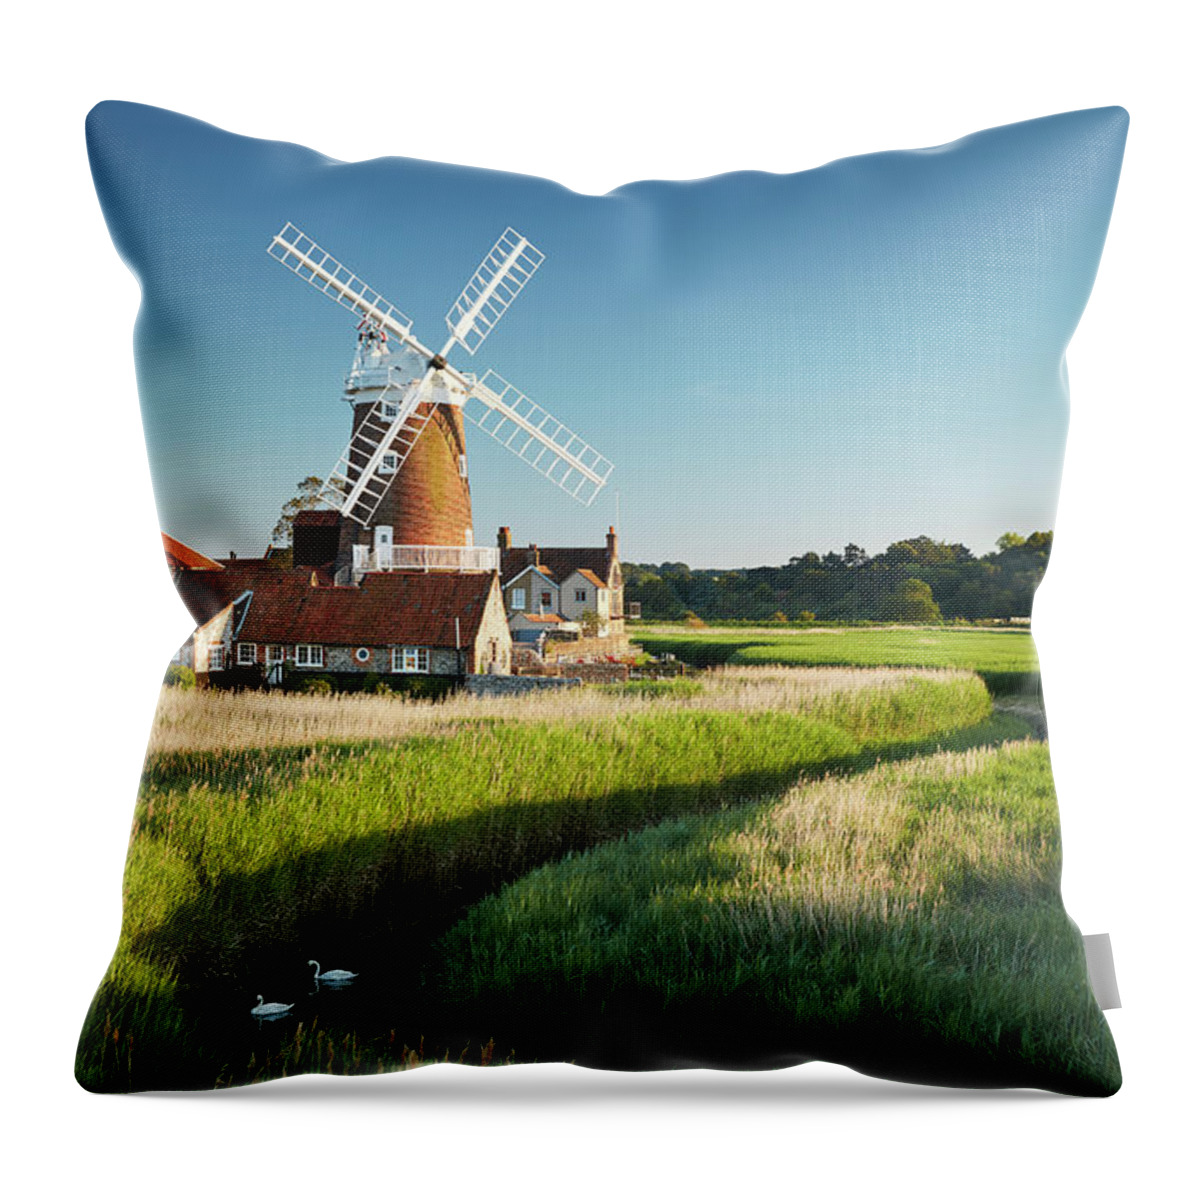 Estock Throw Pillow featuring the digital art United Kingdom, England, Norfolk, Great Britain, North Sea, Holkham National Nature Reserve, British Isles, Cley Next The Sea, Cley Windmill #2 by Richard Taylor